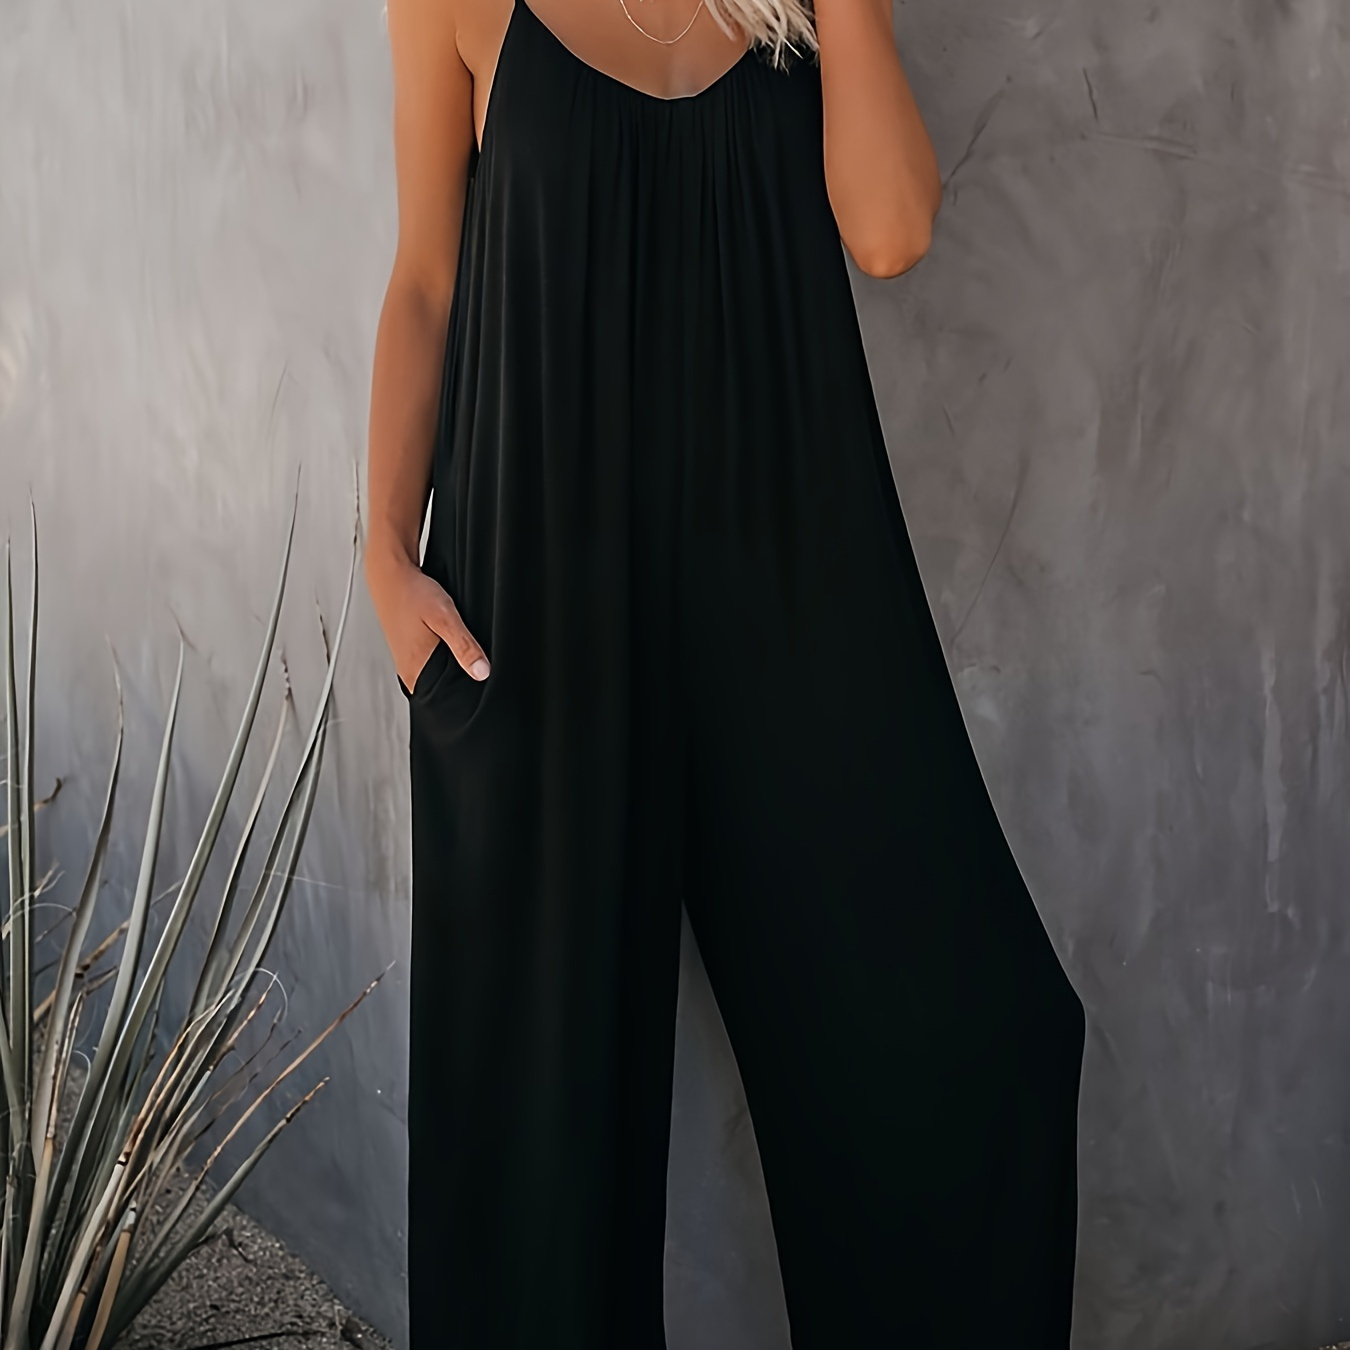 

Plus Size Solid Color Cami Jumpsuit, Casual Pocket Sleeveless Spaghetti Strap Jumpsuit For Summer, Women's Plus Size clothing